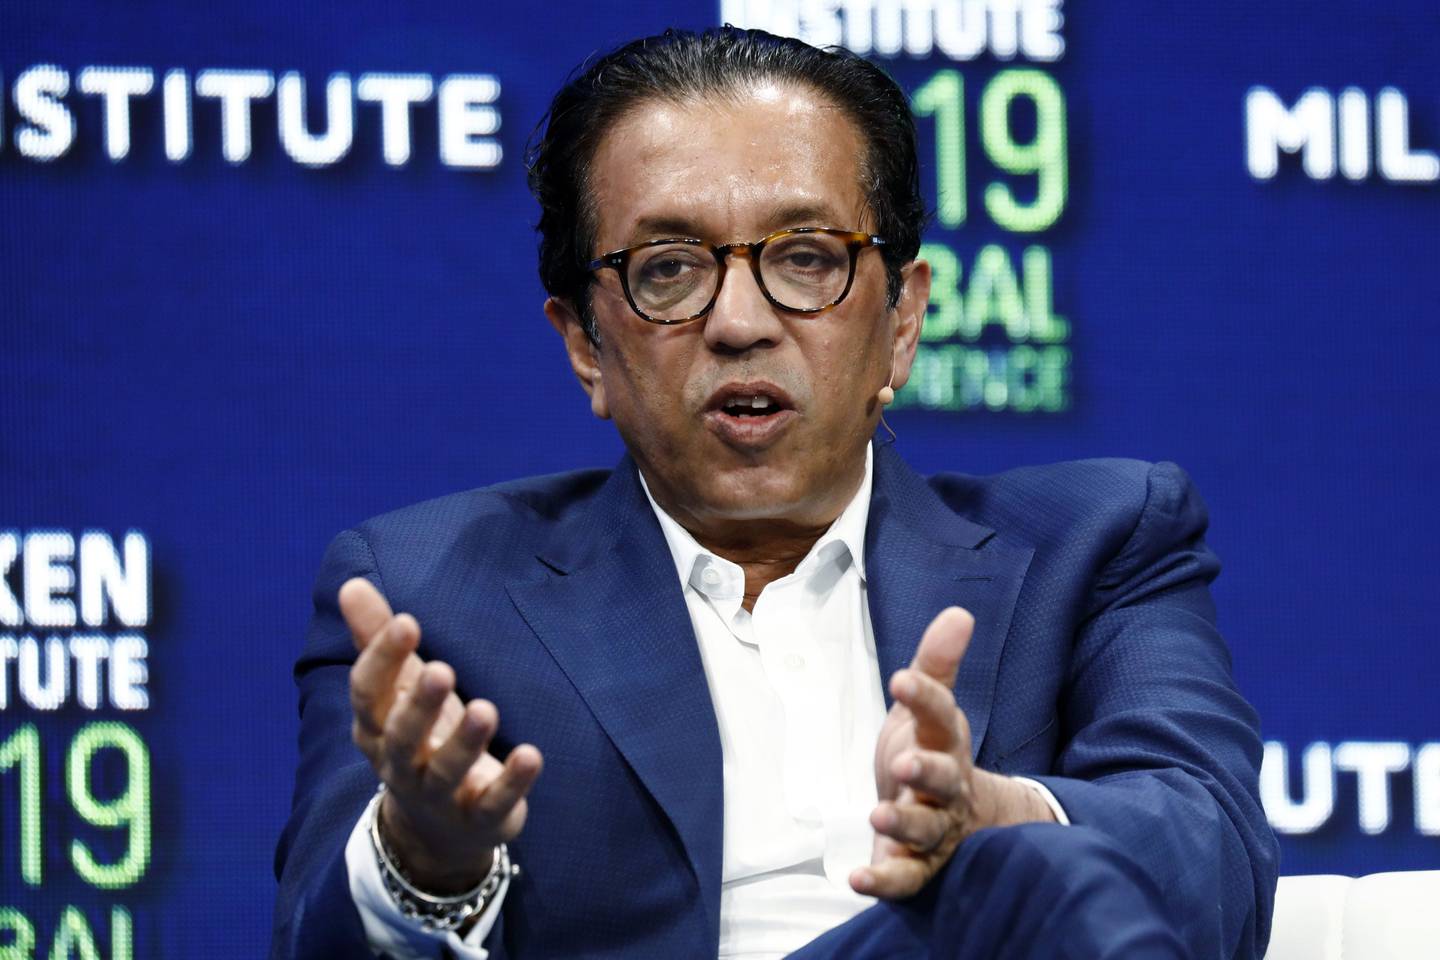 Rajeev Misra, chief executive officer of SoftBank Investment Advisers, speaks during the Milken Institute Global Conference in Beverly Hills, California, U.S., on Monday, April 29, 2019. The conference brings together leaders in business, government, technology, philanthropy, academia, and the media to discuss actionable and collaborative solutions to some of the most important questions of our time.dfd